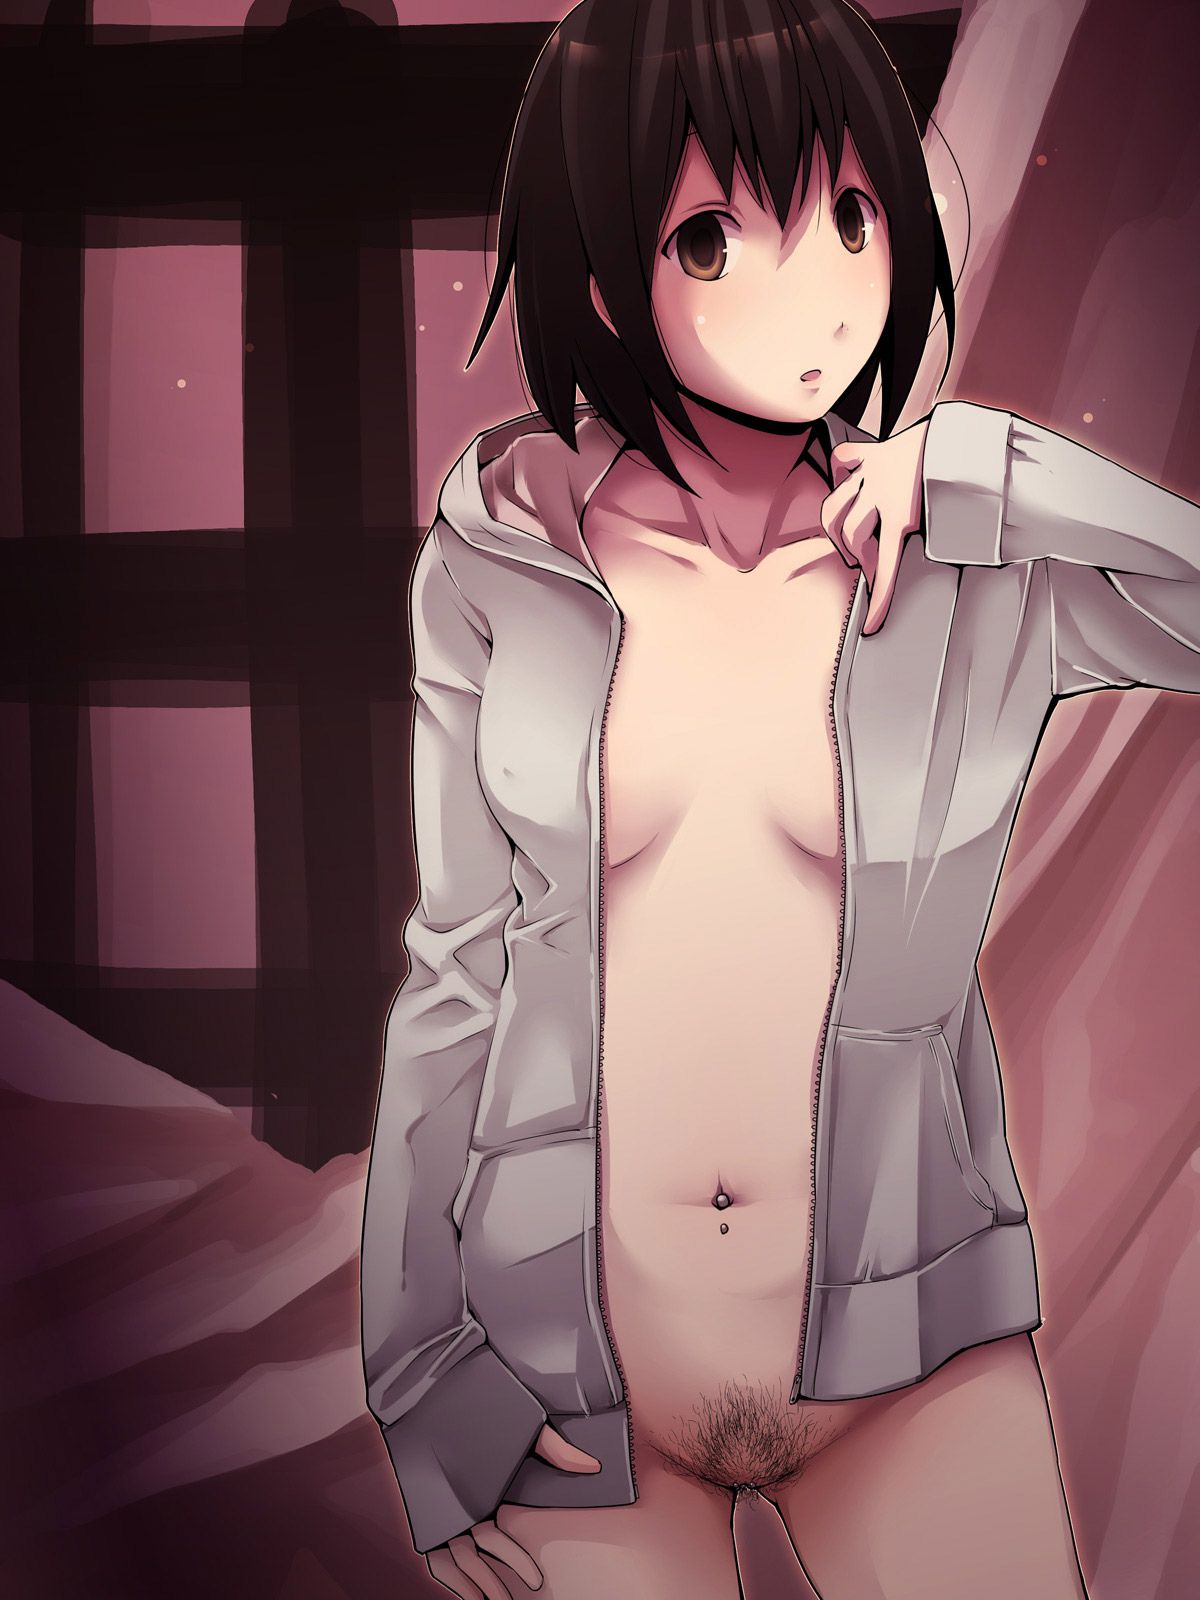 40 erotic images that I think people who thought of 2D naked hoodies are geniuses 15